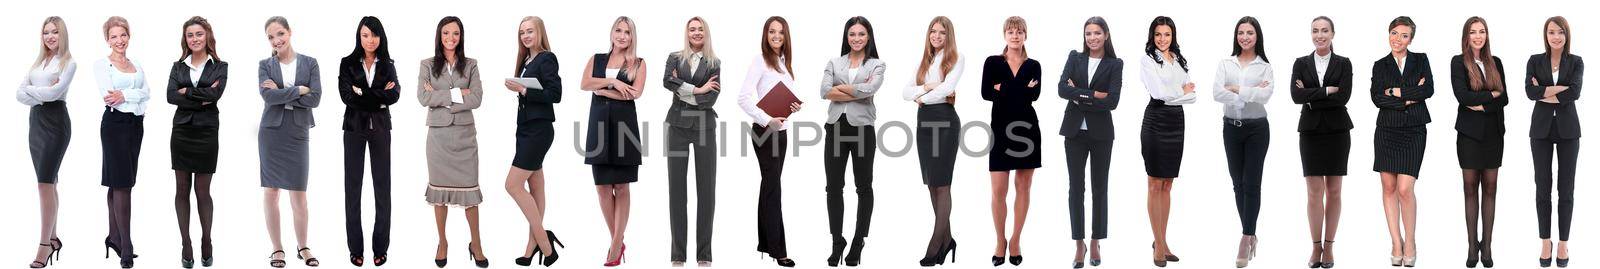 collage of successful modern businesswoman. isolated on white by asdf